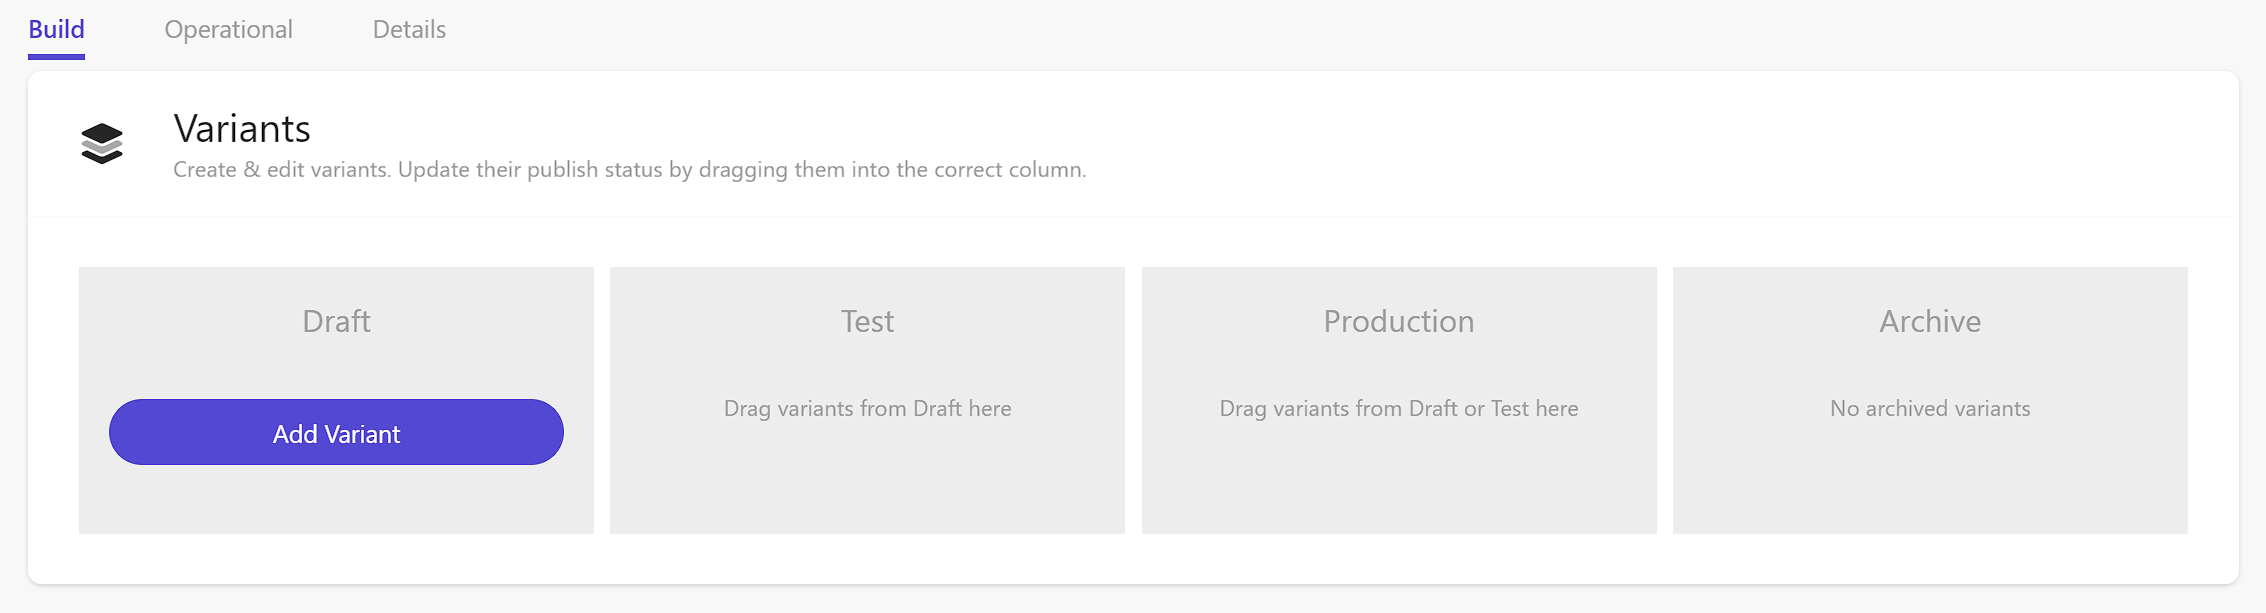 Screenshot of the variant management section with options to add and sort variants into draft, test, and production.